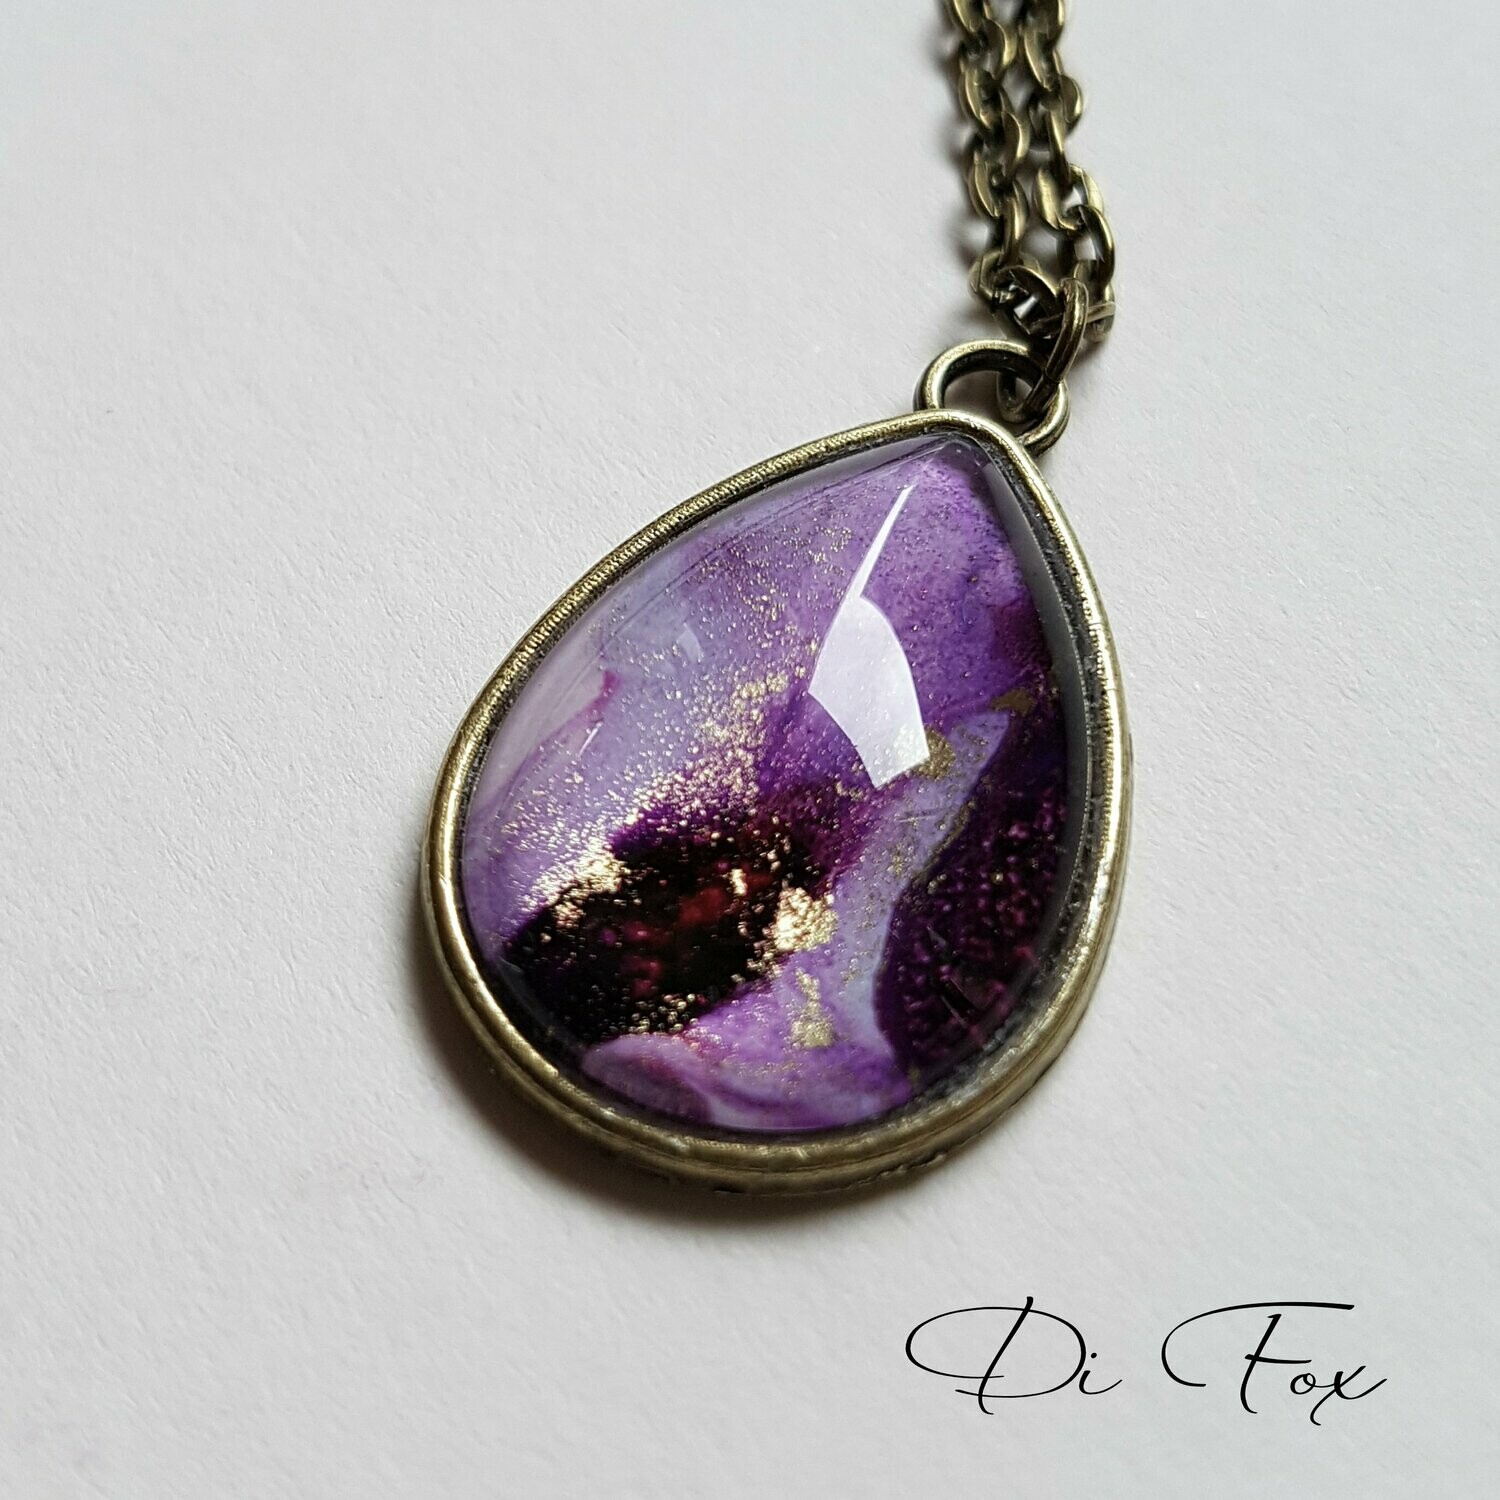 Bronze teardrop pendant & chain in Deep Violet with gold